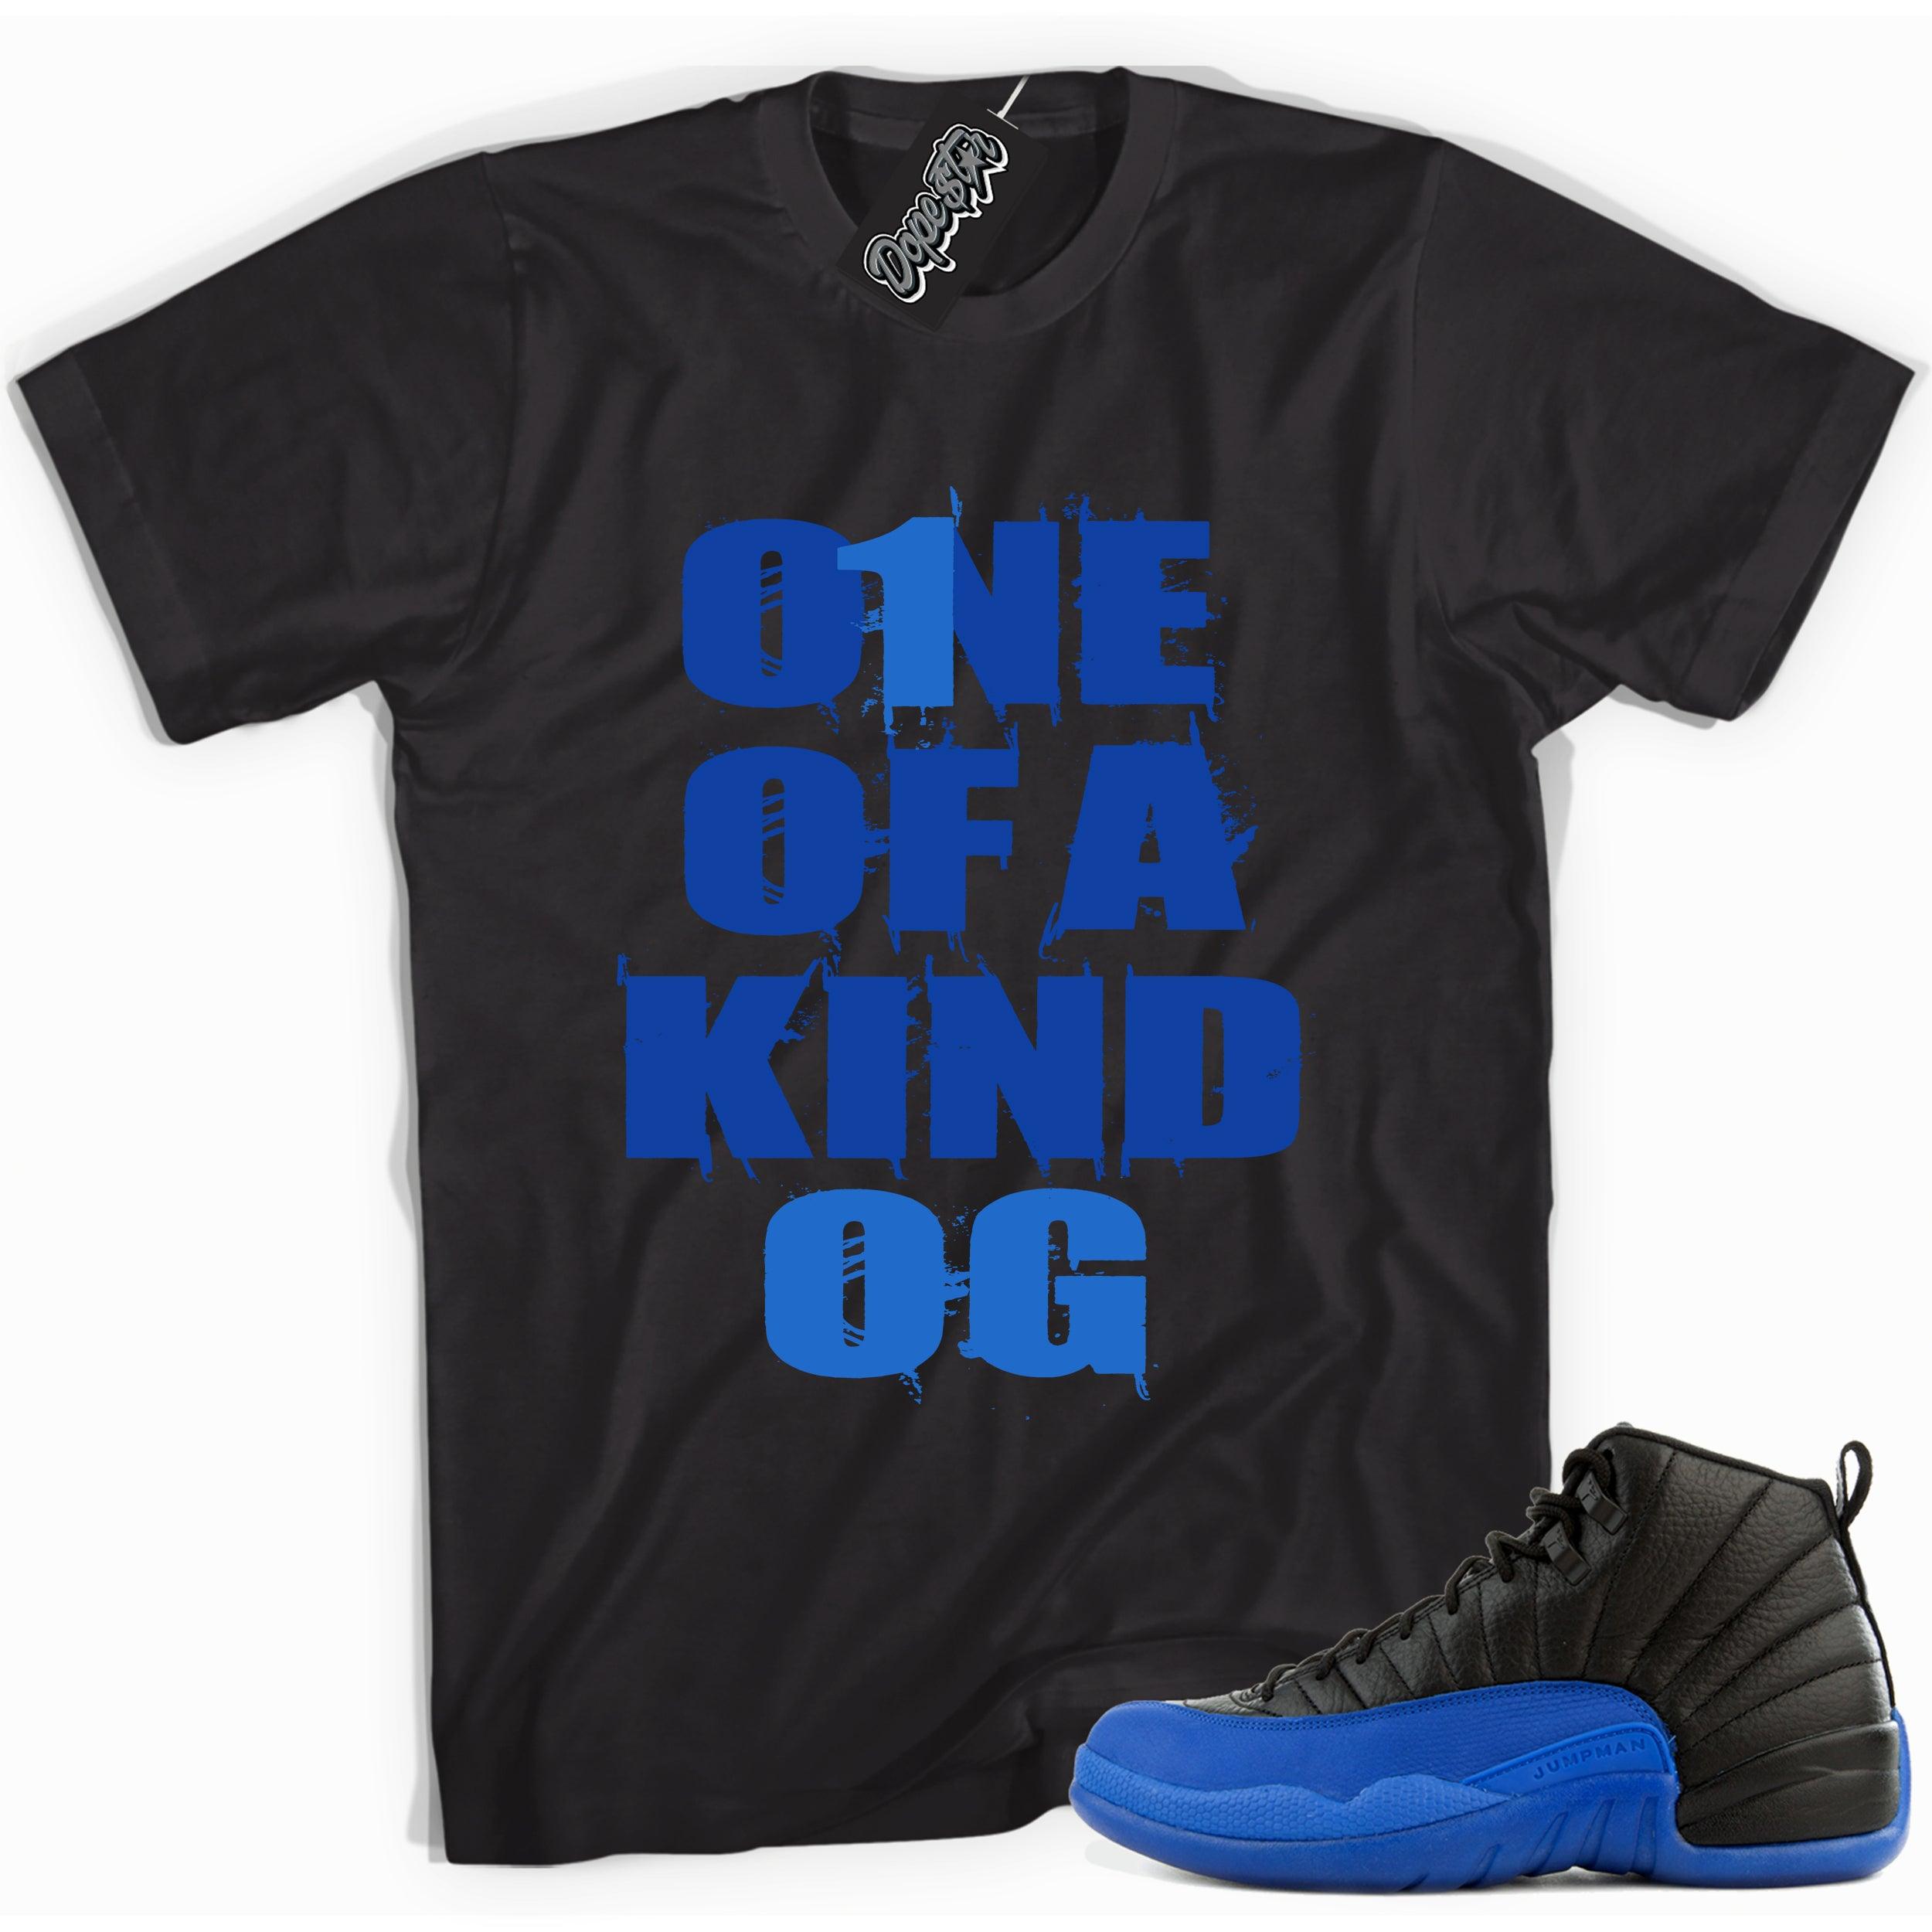 Cool black graphic tee with 'one of a kind' print, that perfectly matches  Air Jordan 12 Retro Black Game Royal sneakers.